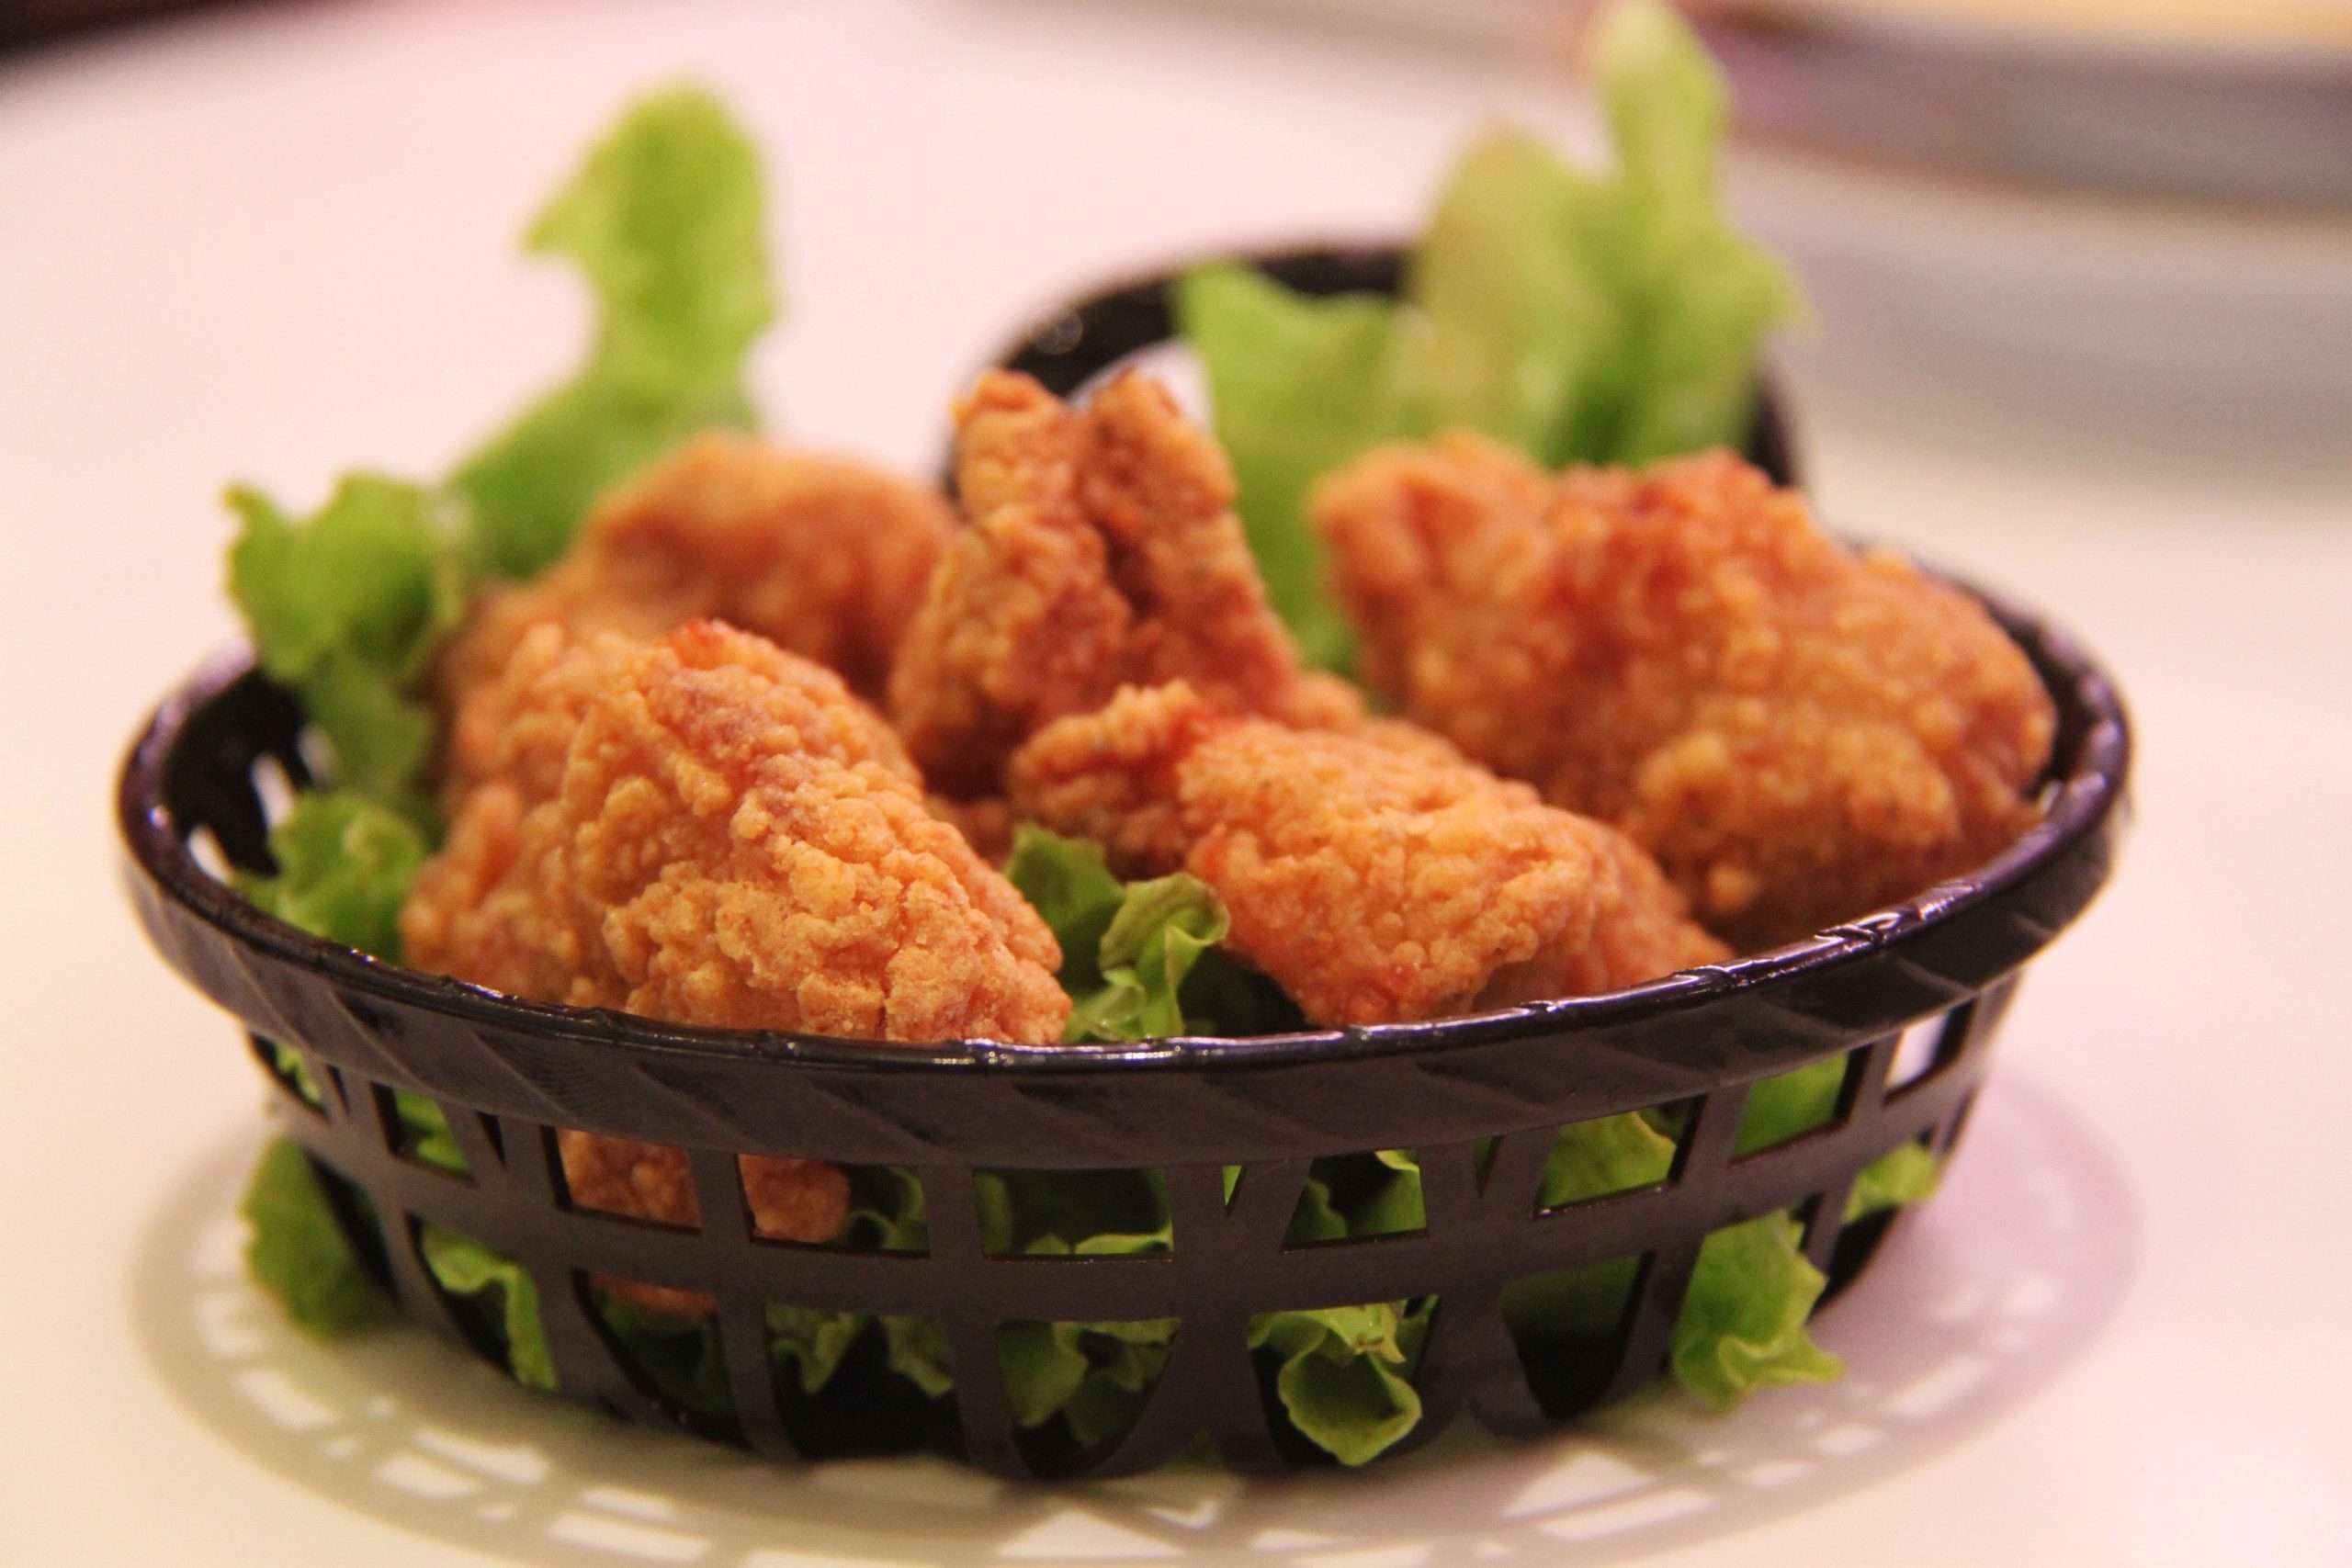 fried chicken in basket made in commercial chicken frying equipment